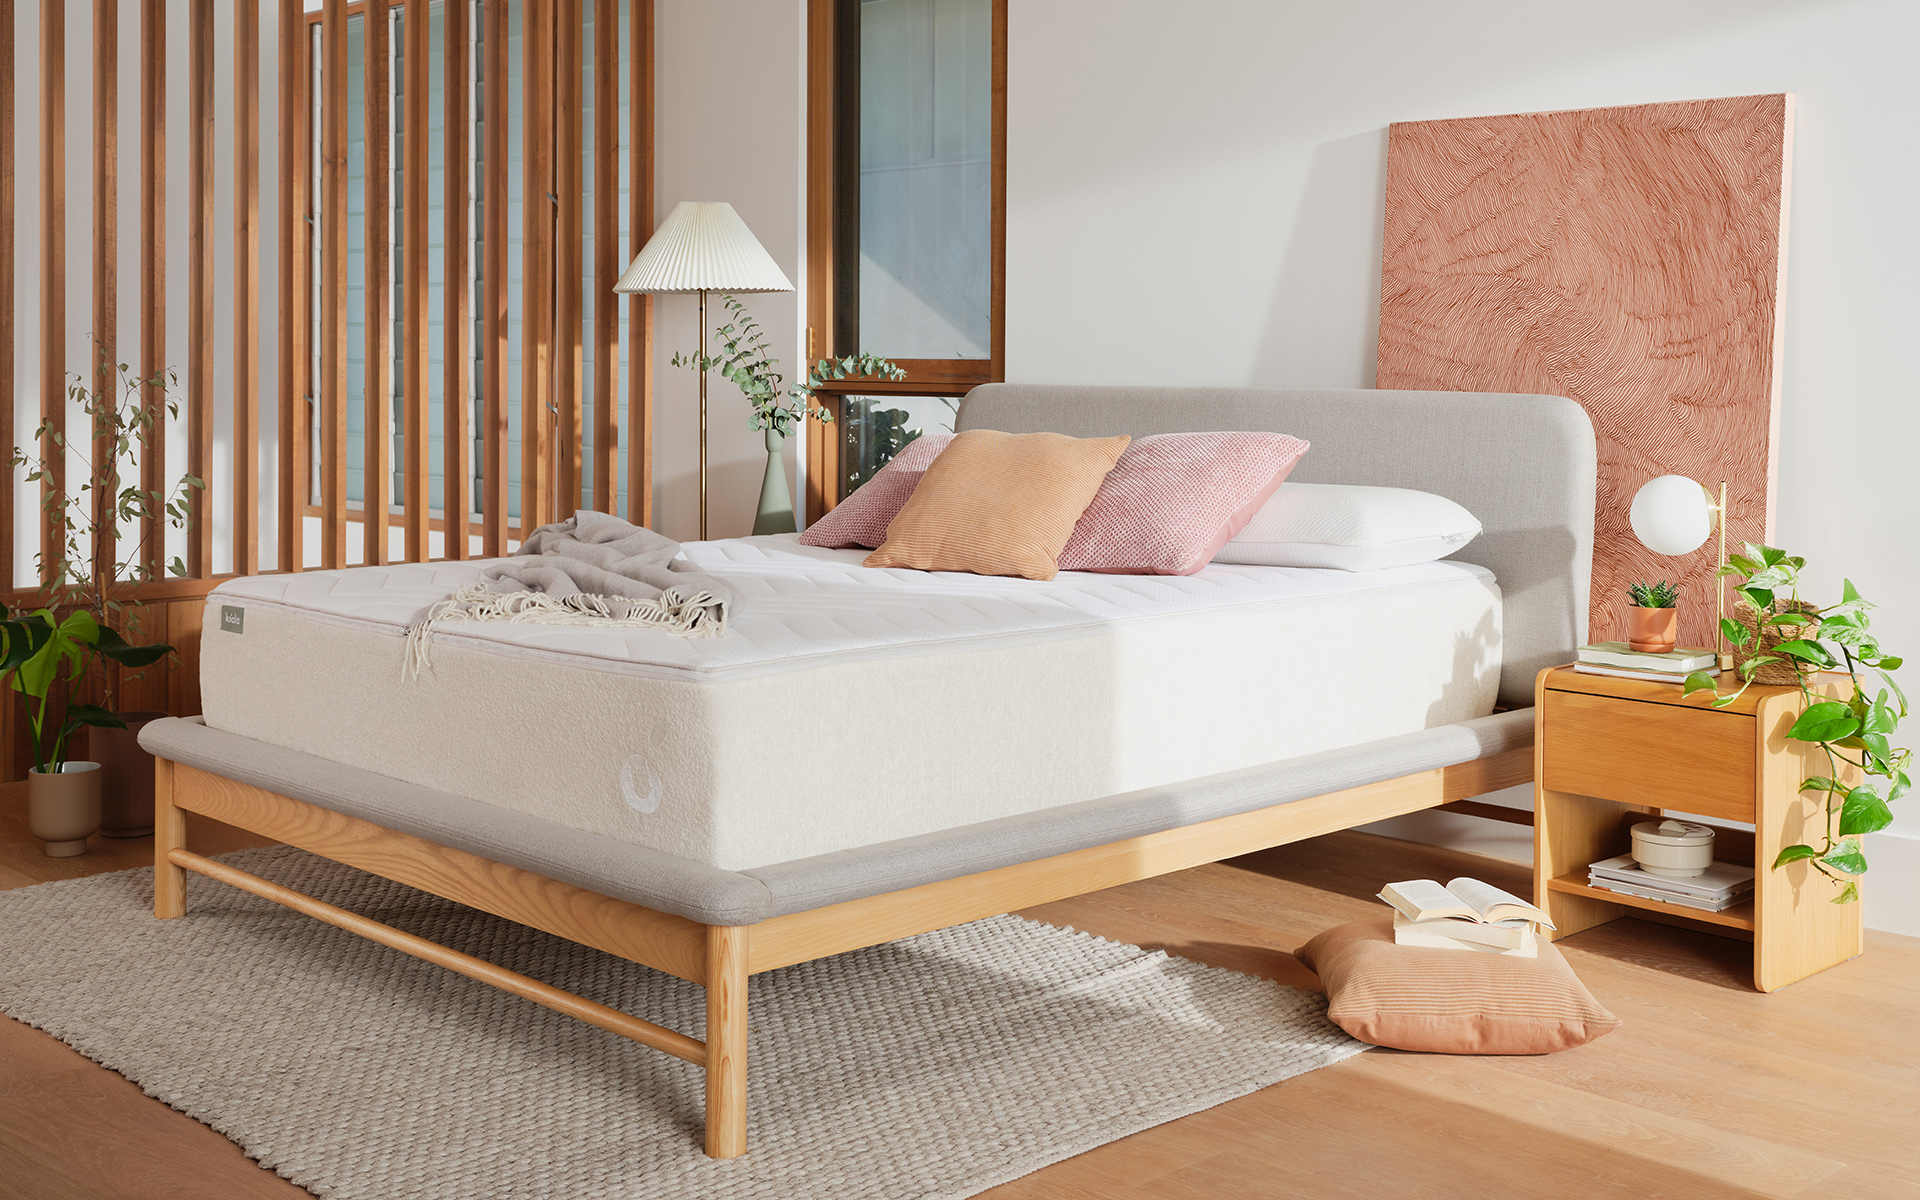  The Koala Calm As Mattress in beautiful bedroom with timber features and beautiful art